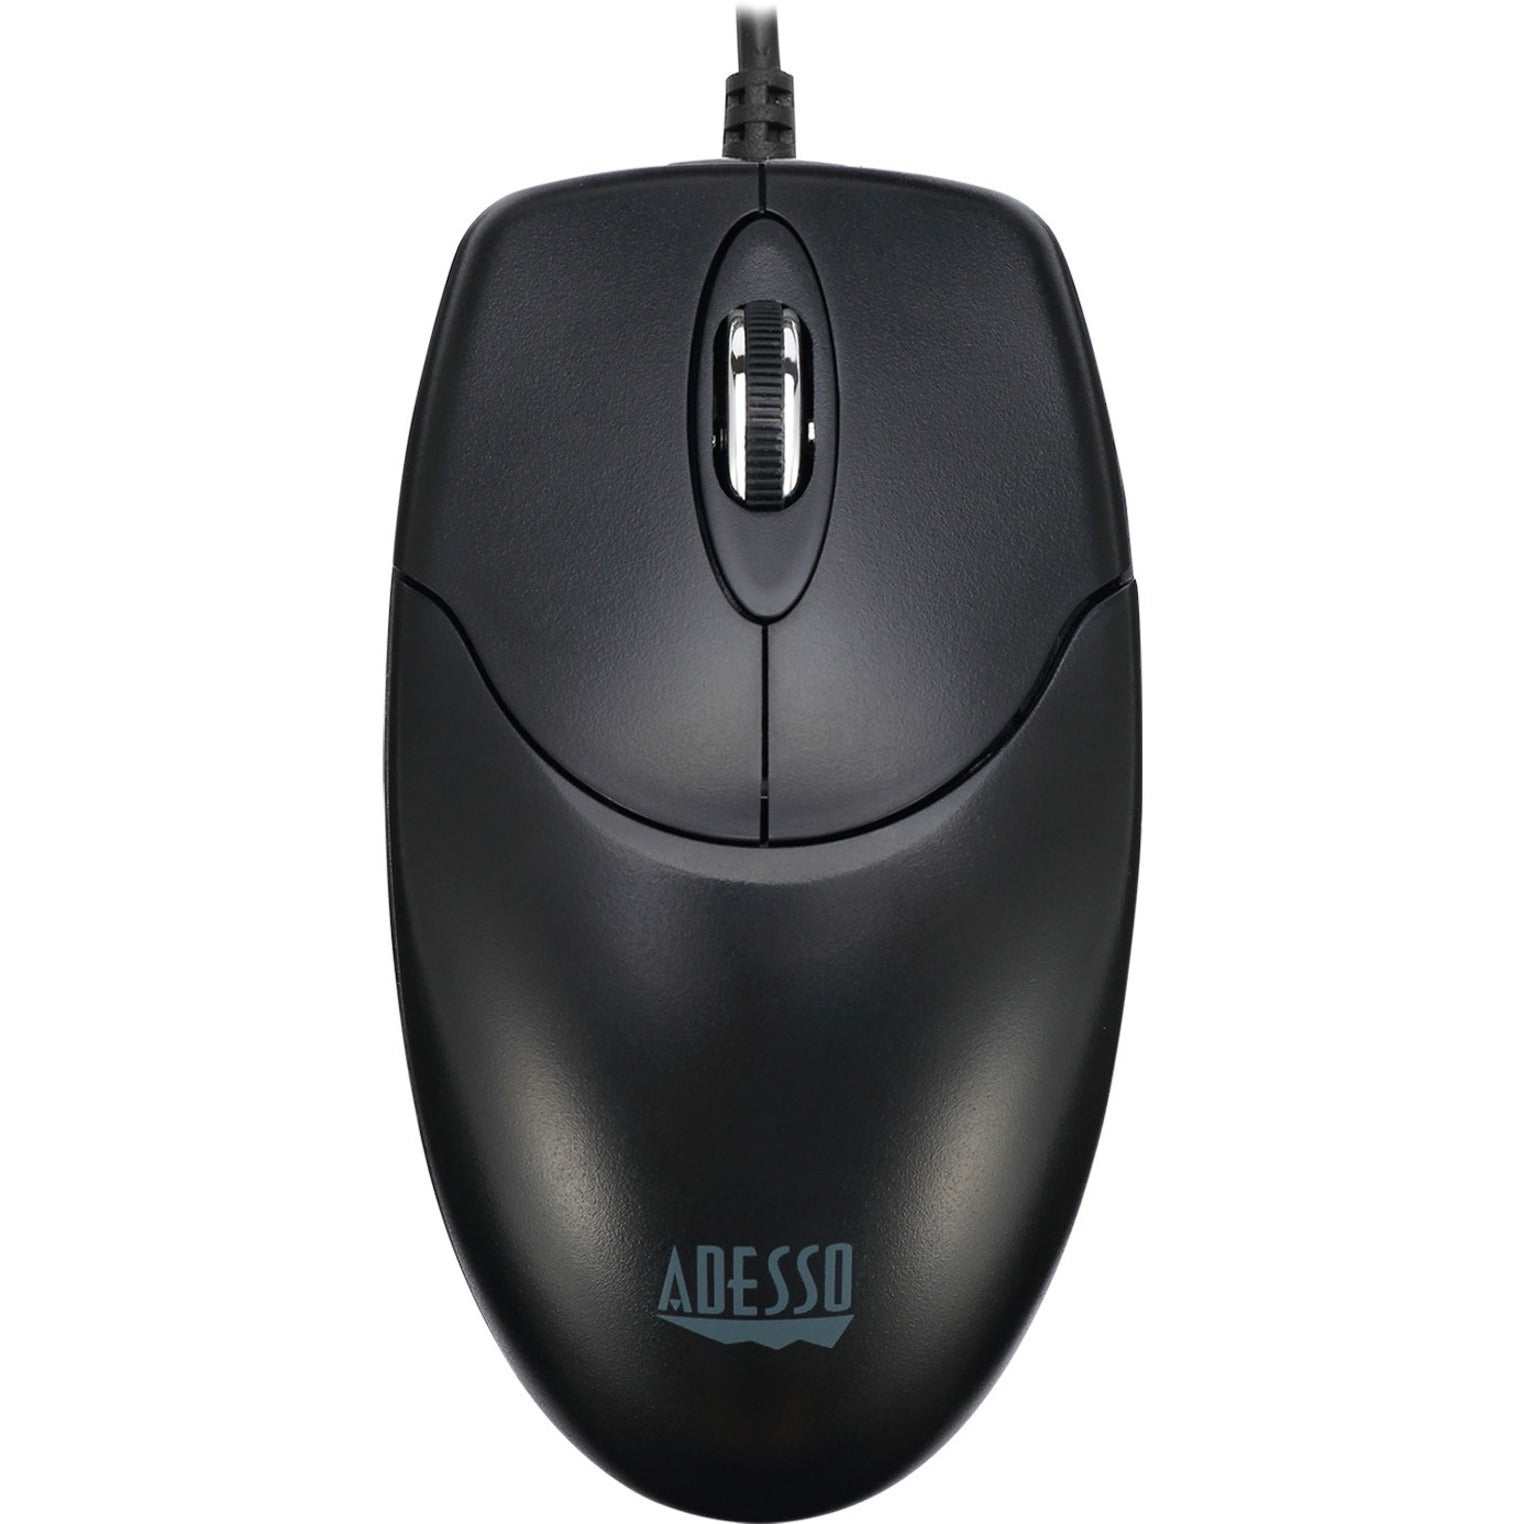 Adesso IMOUSEM6-TAA iMouse M6-TAA Optical Scroll Mouse, USB Wired, 1000 DPI, 2-Year Warranty